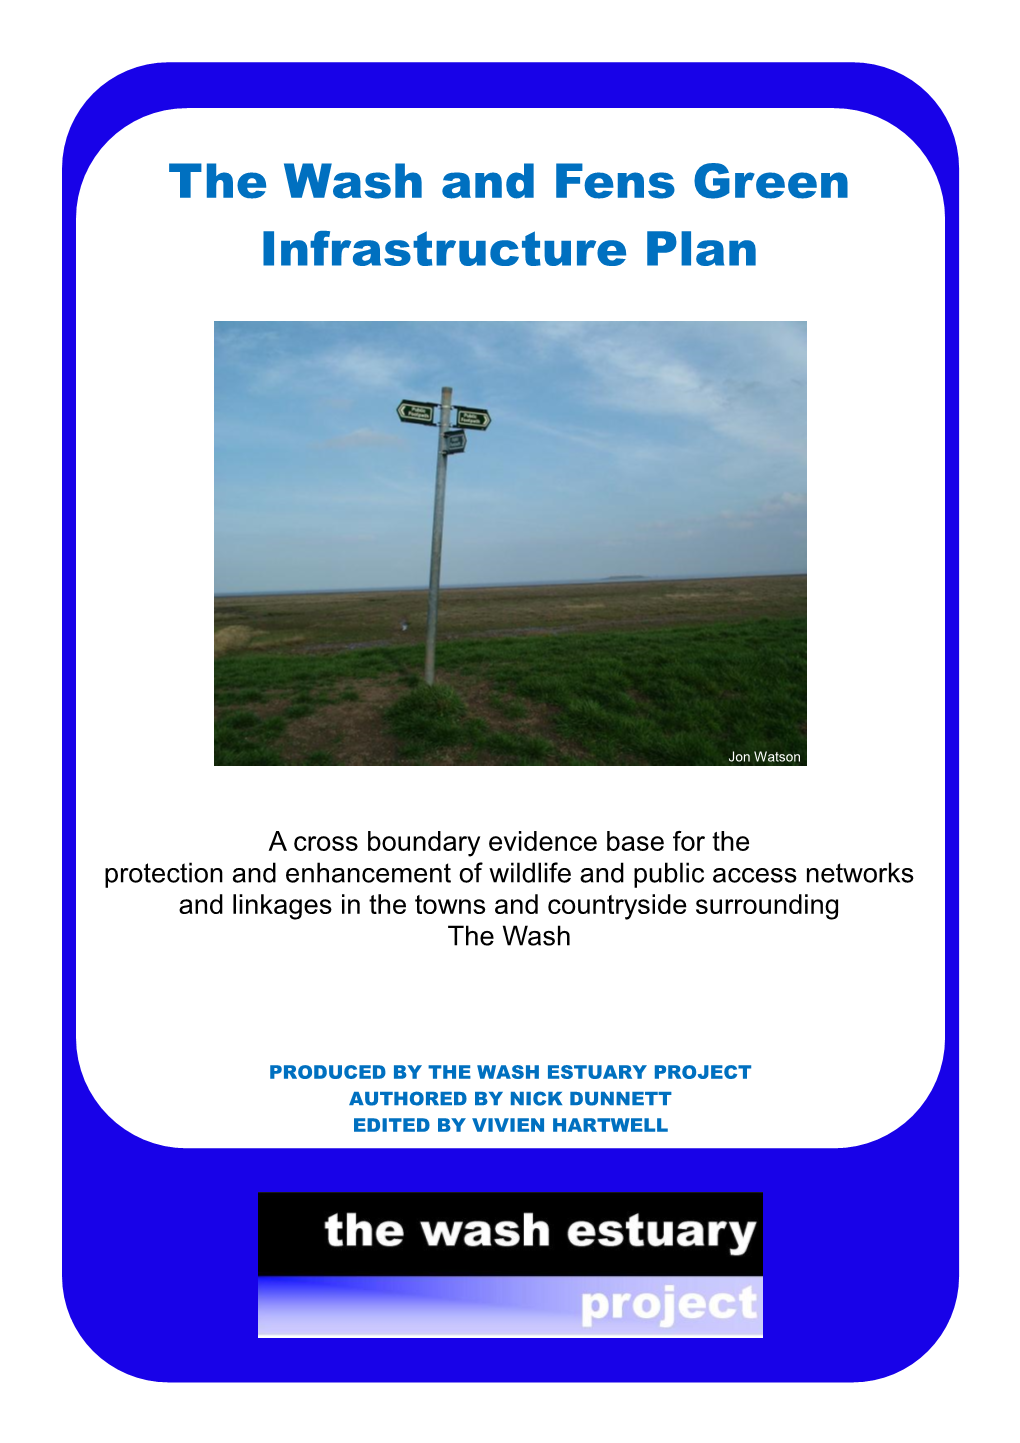 The Wash and Fens Green Infrastructure Plan